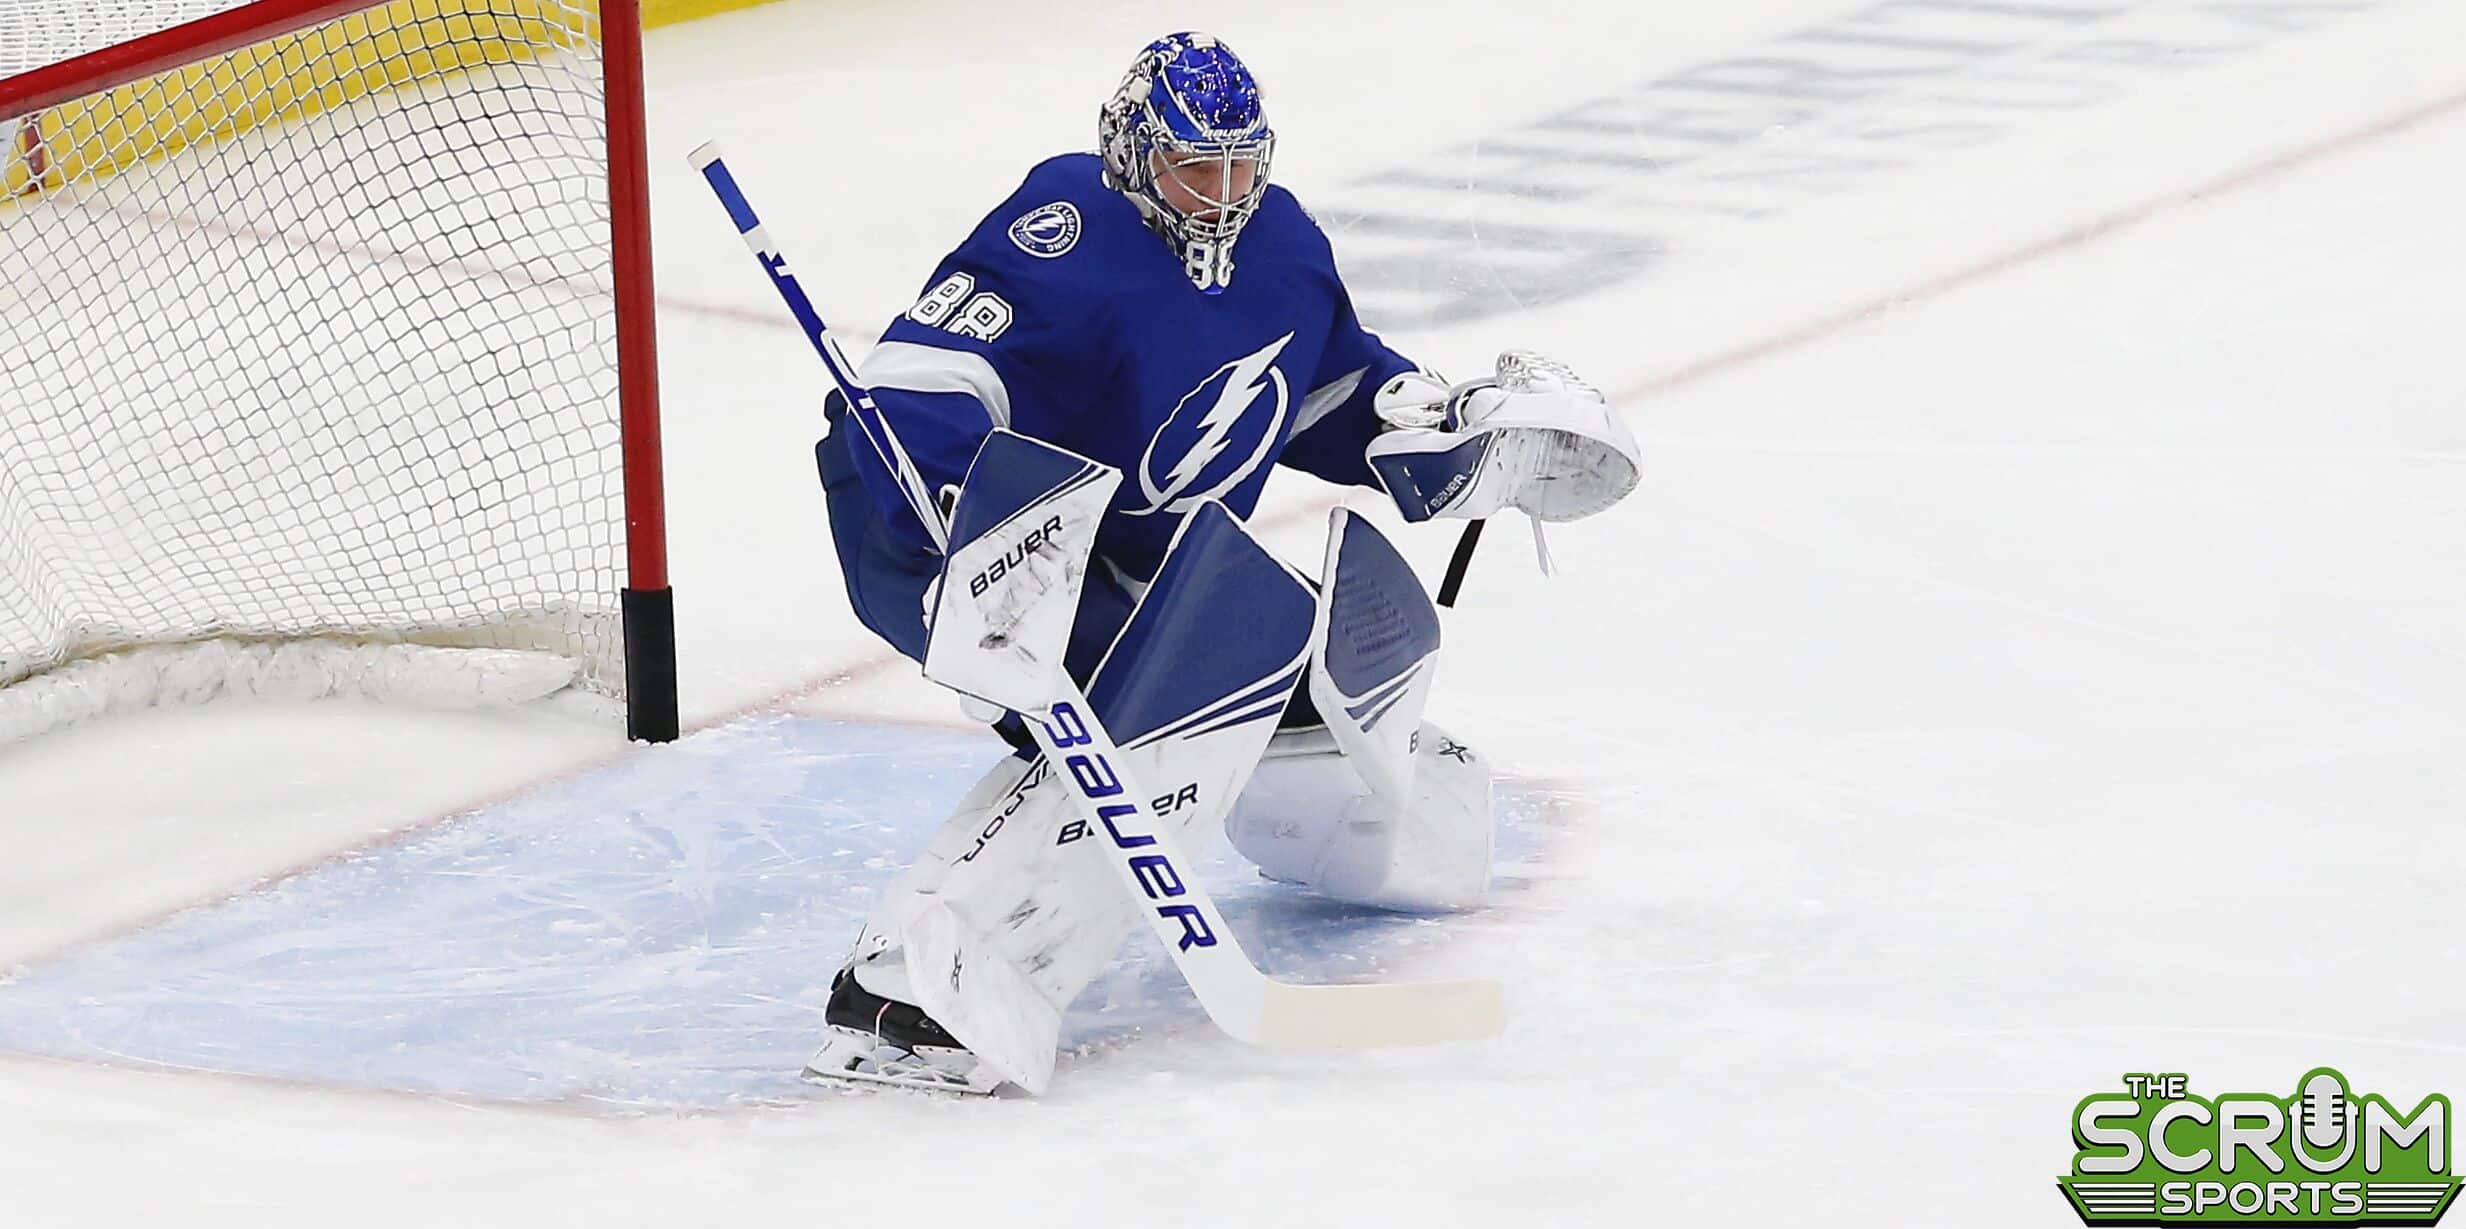 Lightning's Anthony Cirelli 'should be okay' after postgame scrum